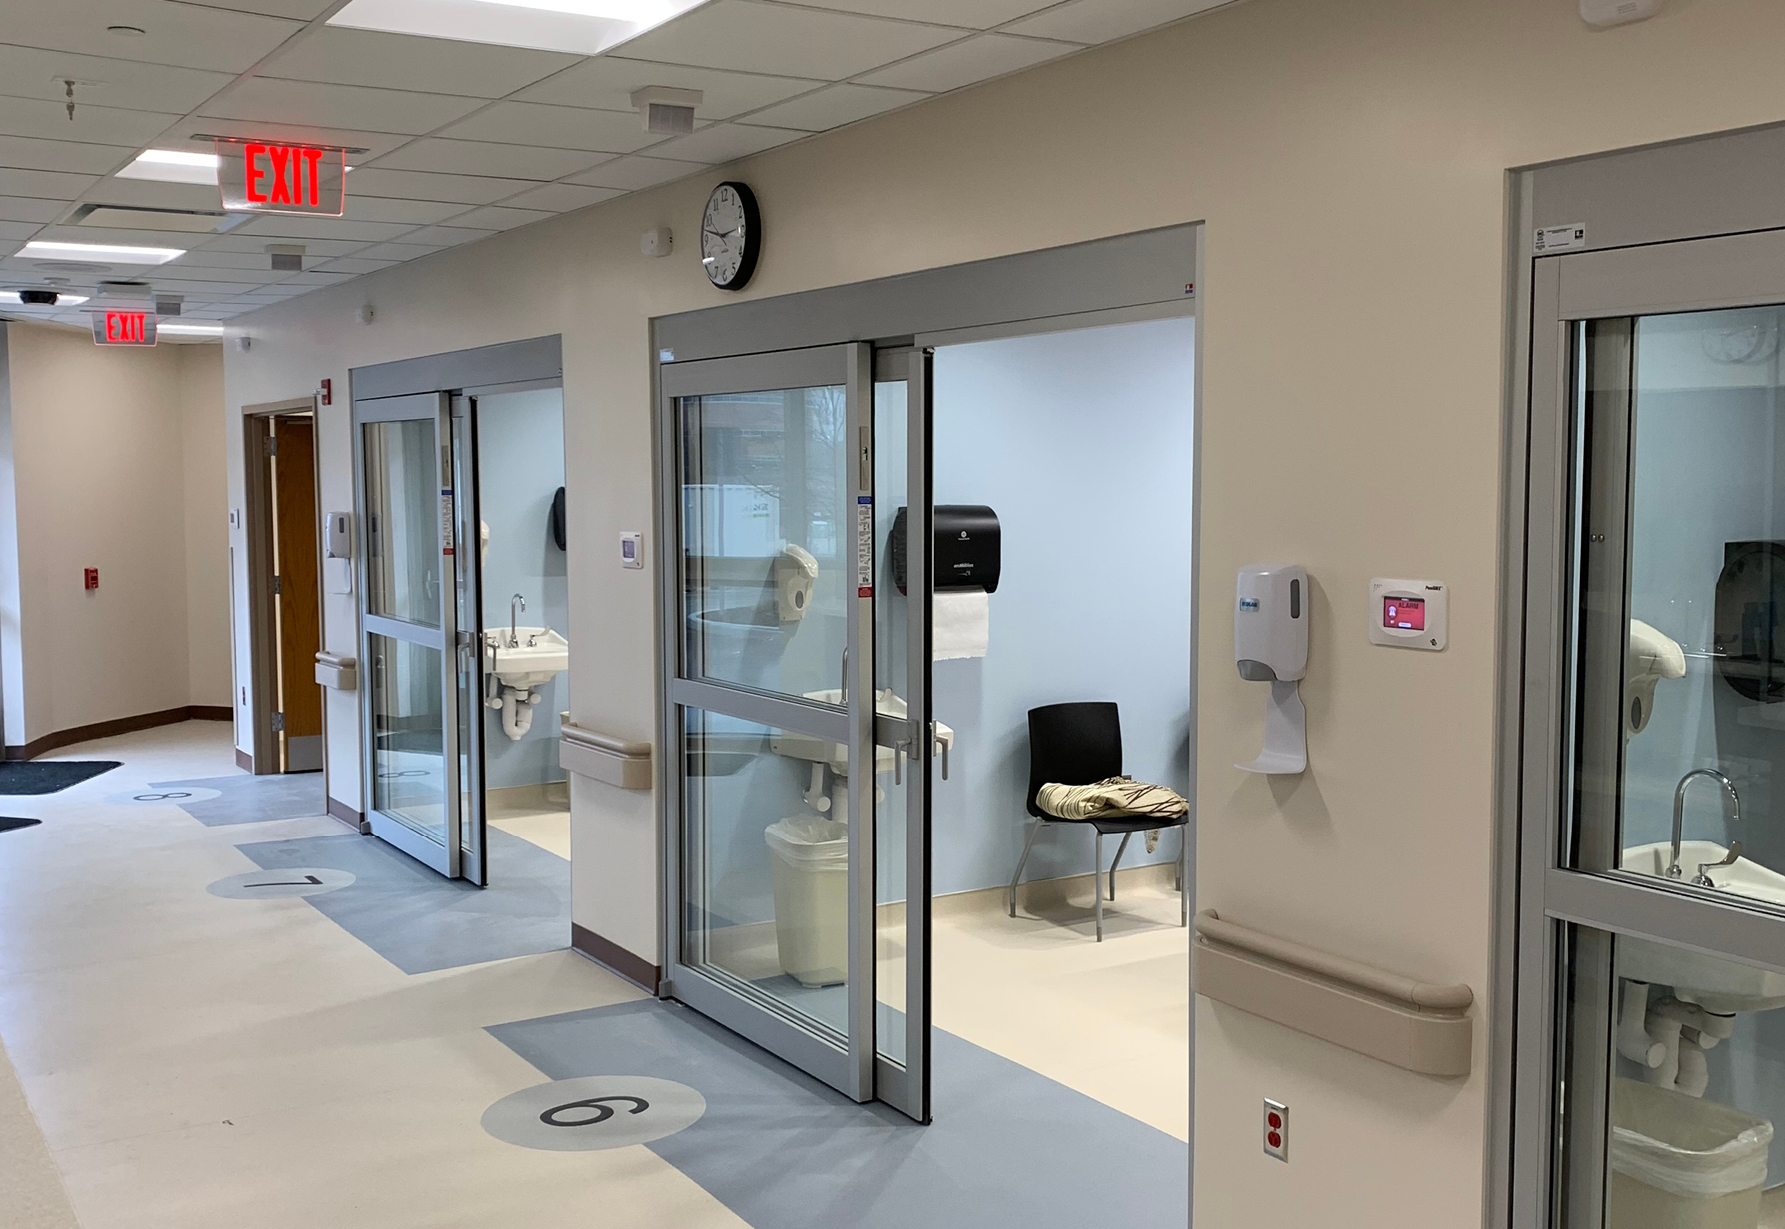 Community Health South - Clinical Decision Unit Addition and Renovation